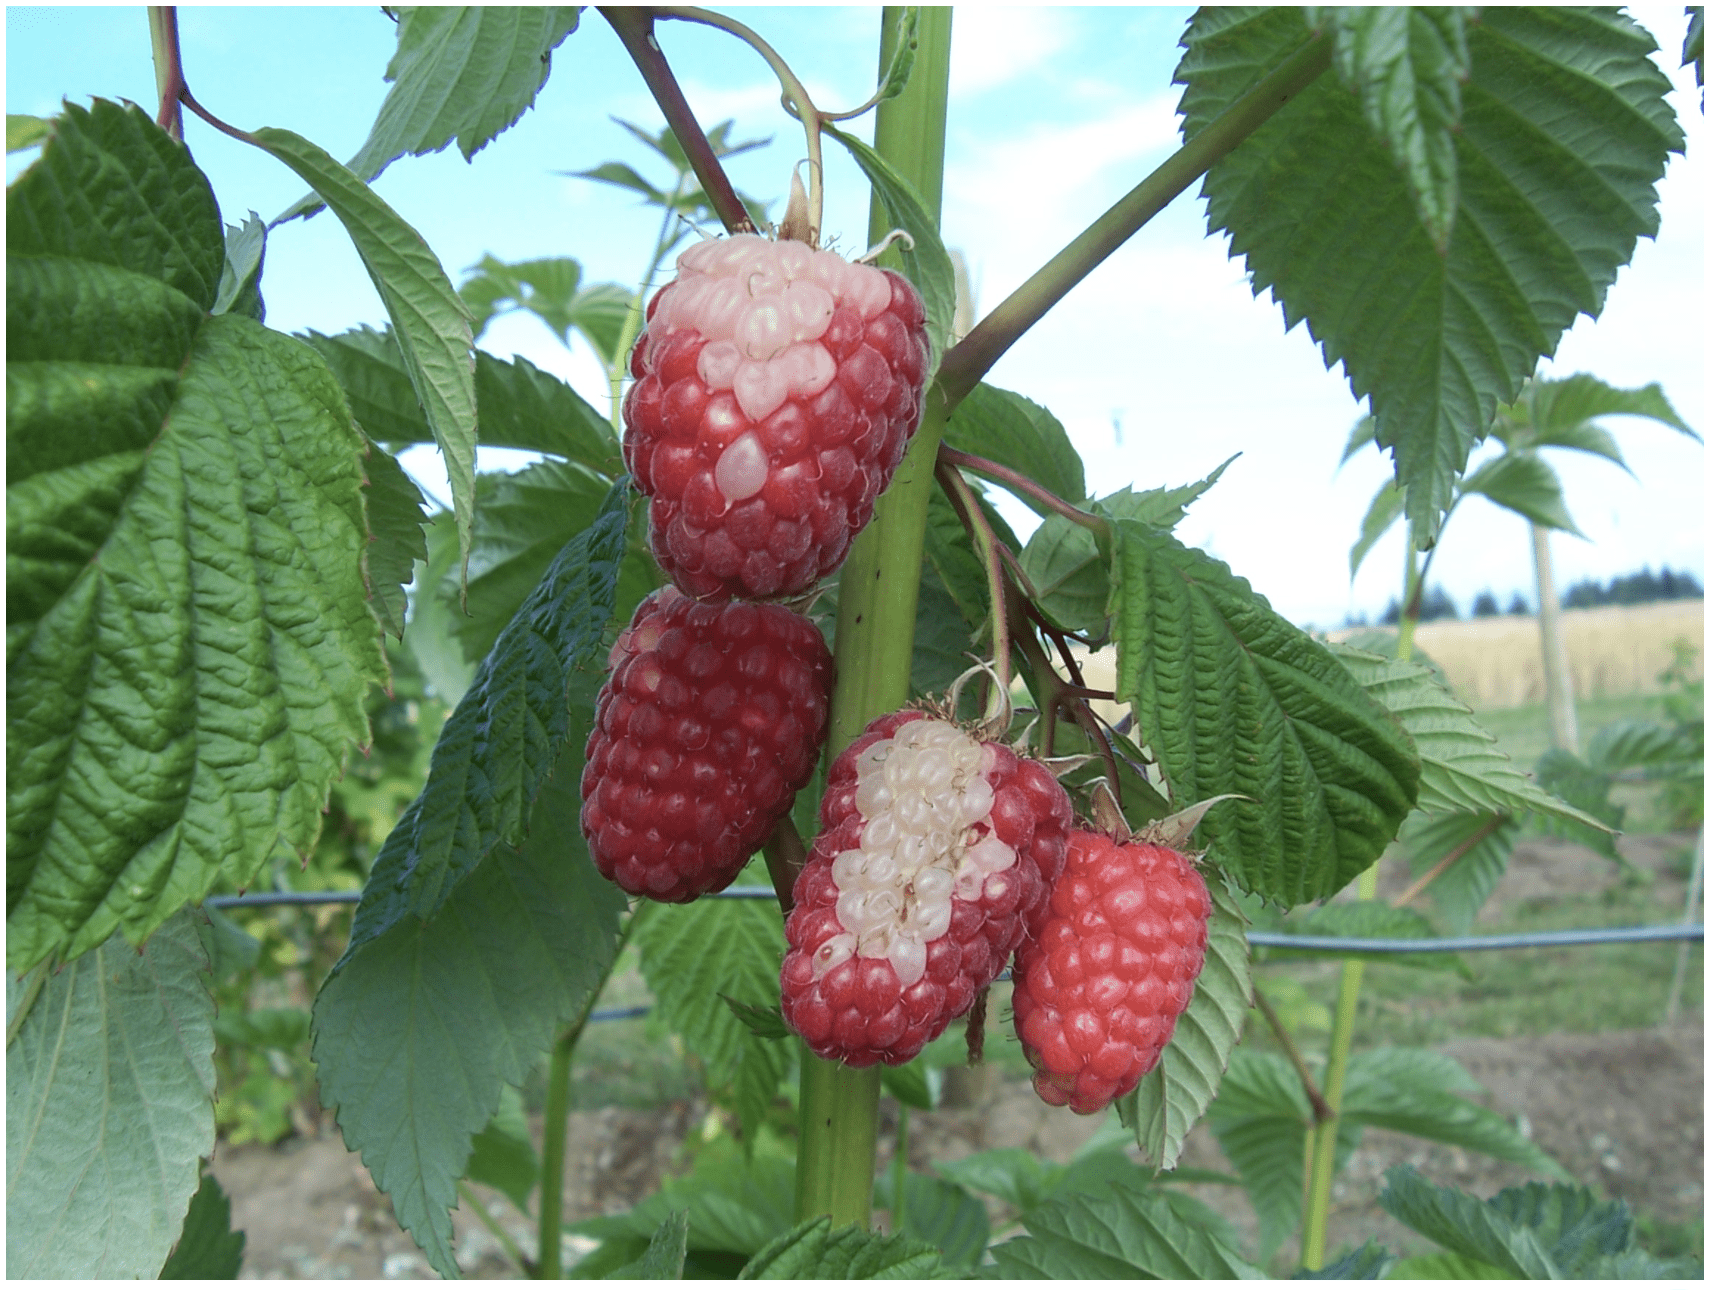 Growing Raspberries in Your Home Garden | OSU Extension Service